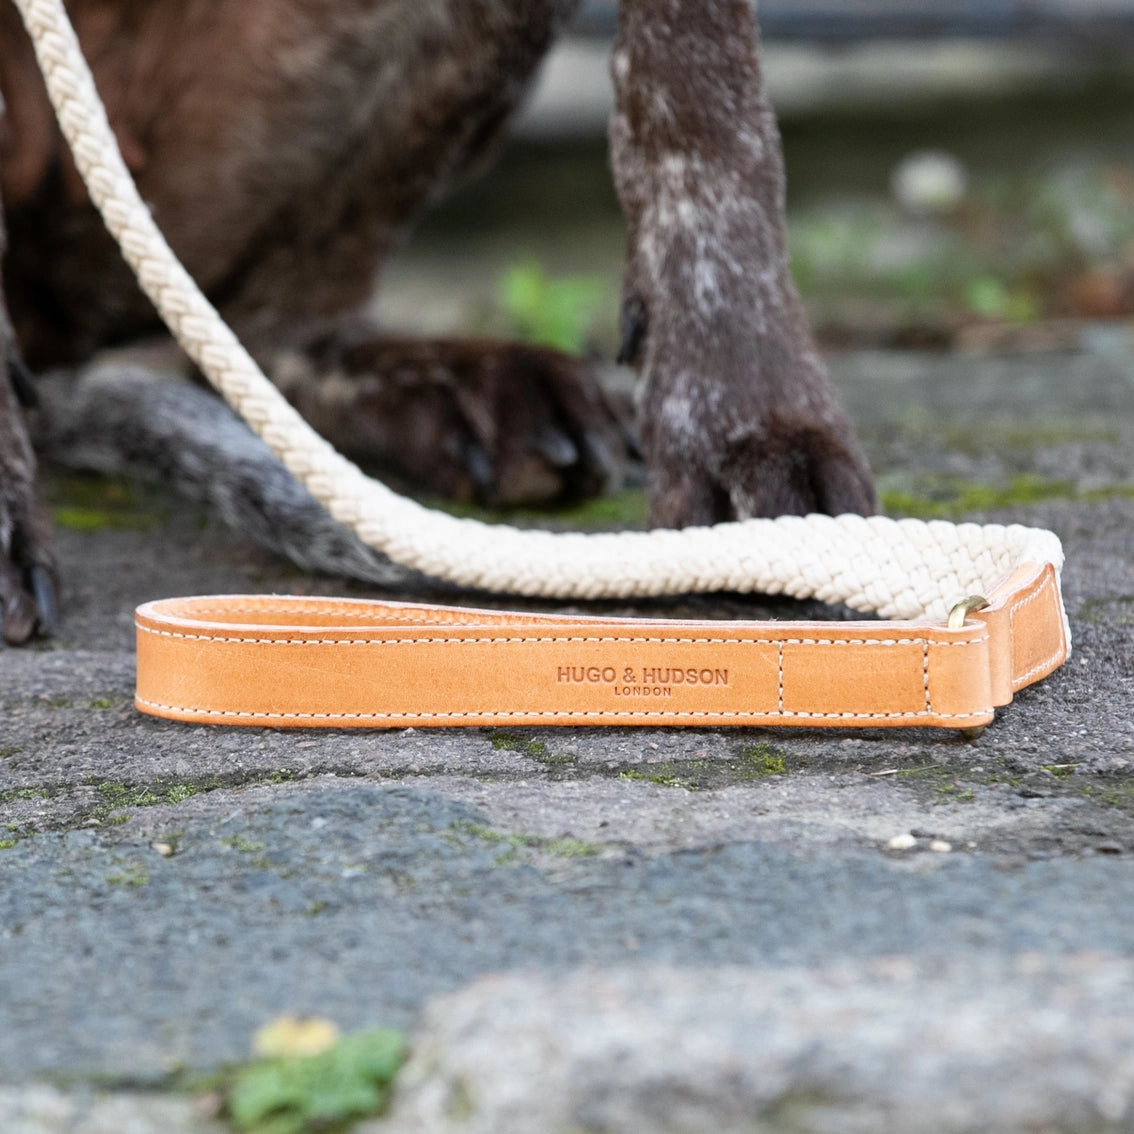 Flat Rope and Tan Leather Dog Lead